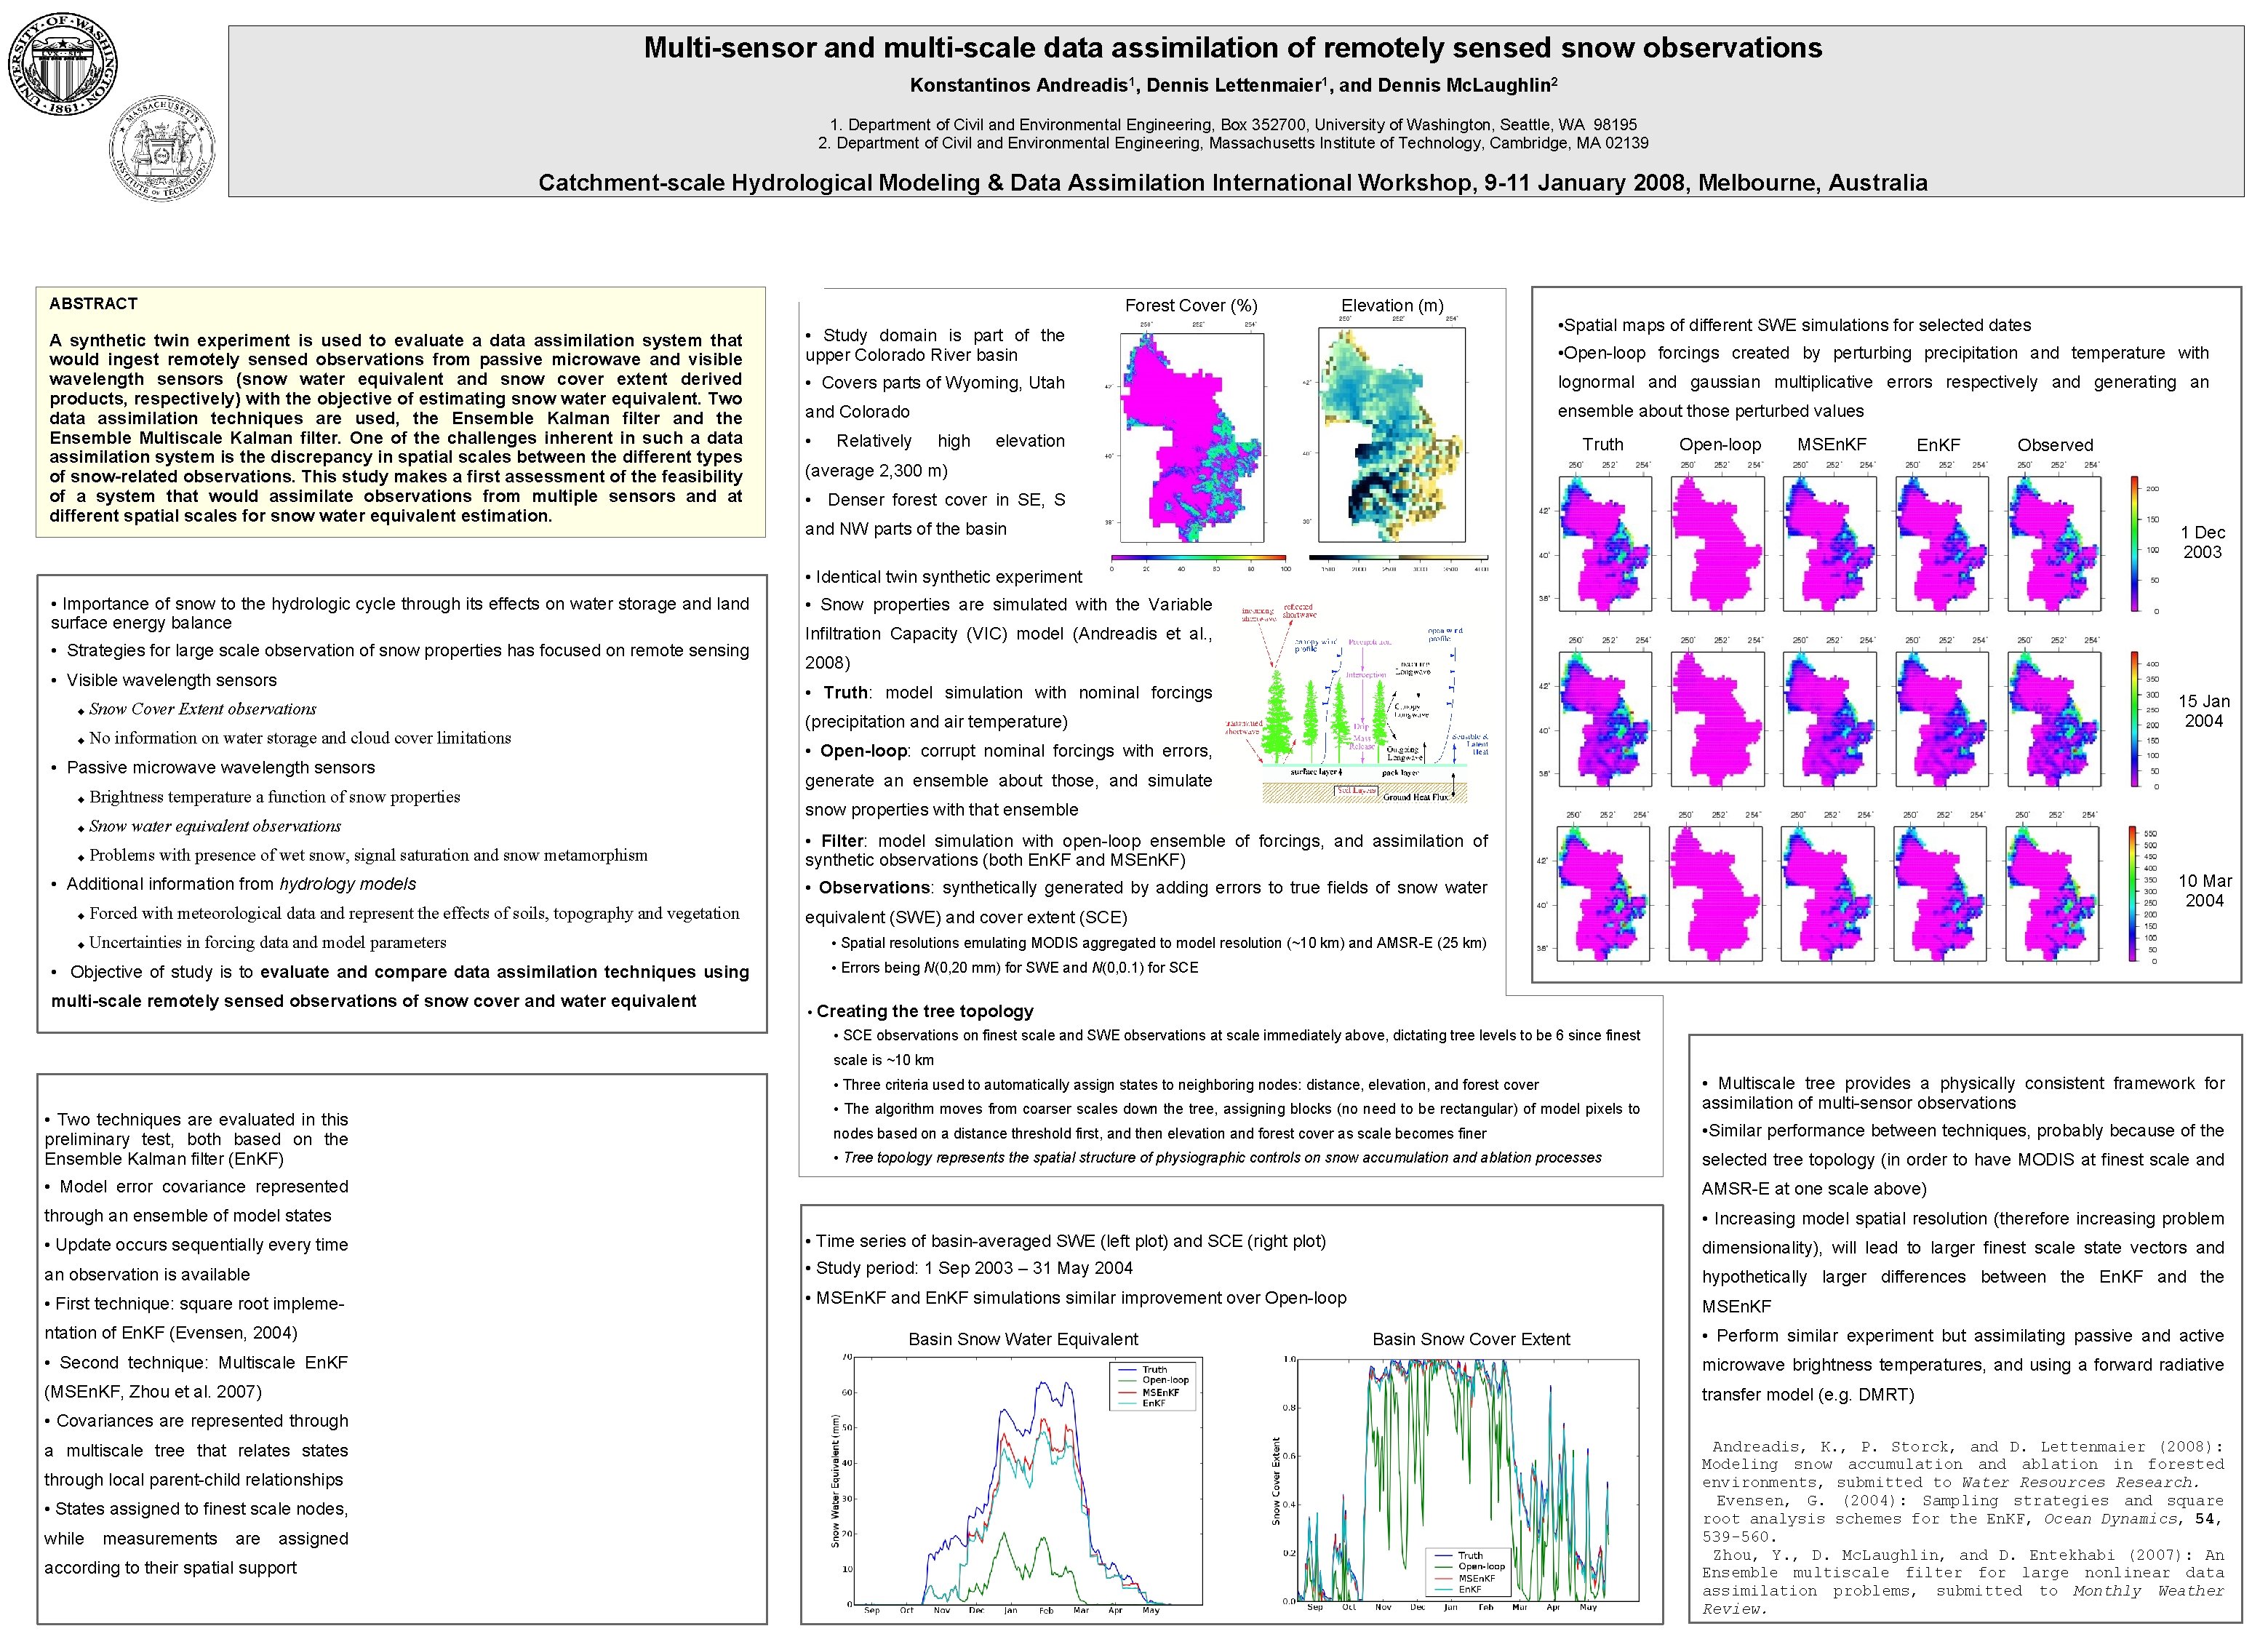 Multi-sensor and multi-scale data assimilation of remotely sensed snow observations Konstantinos Andreadis 1, Dennis